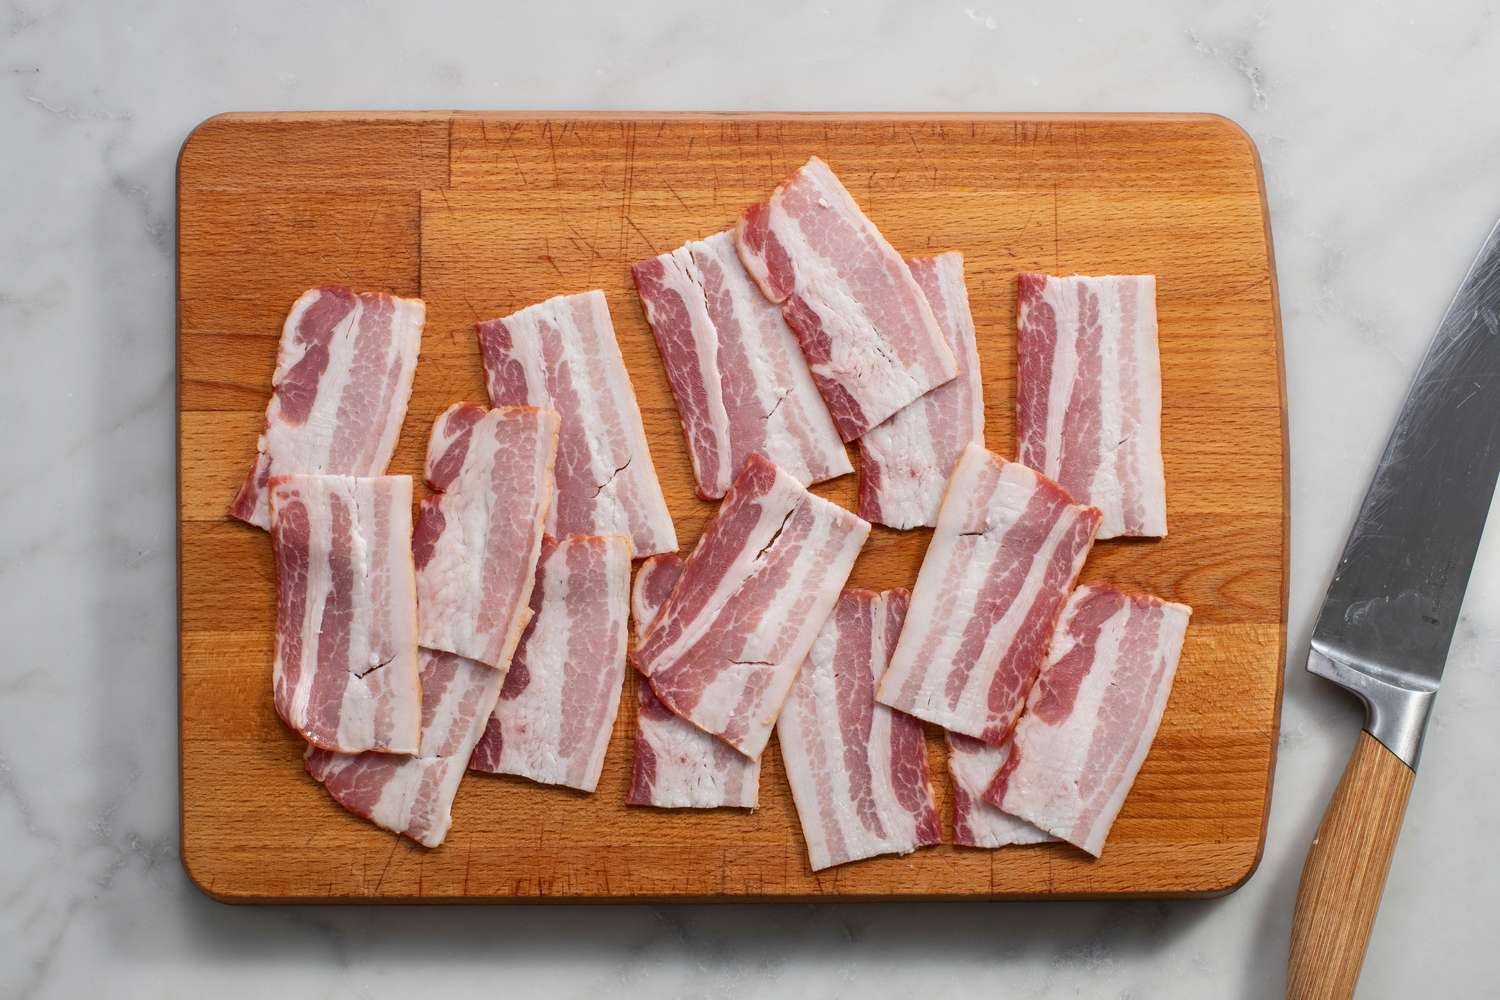 Pieces of bacon cut in half on a cutting board